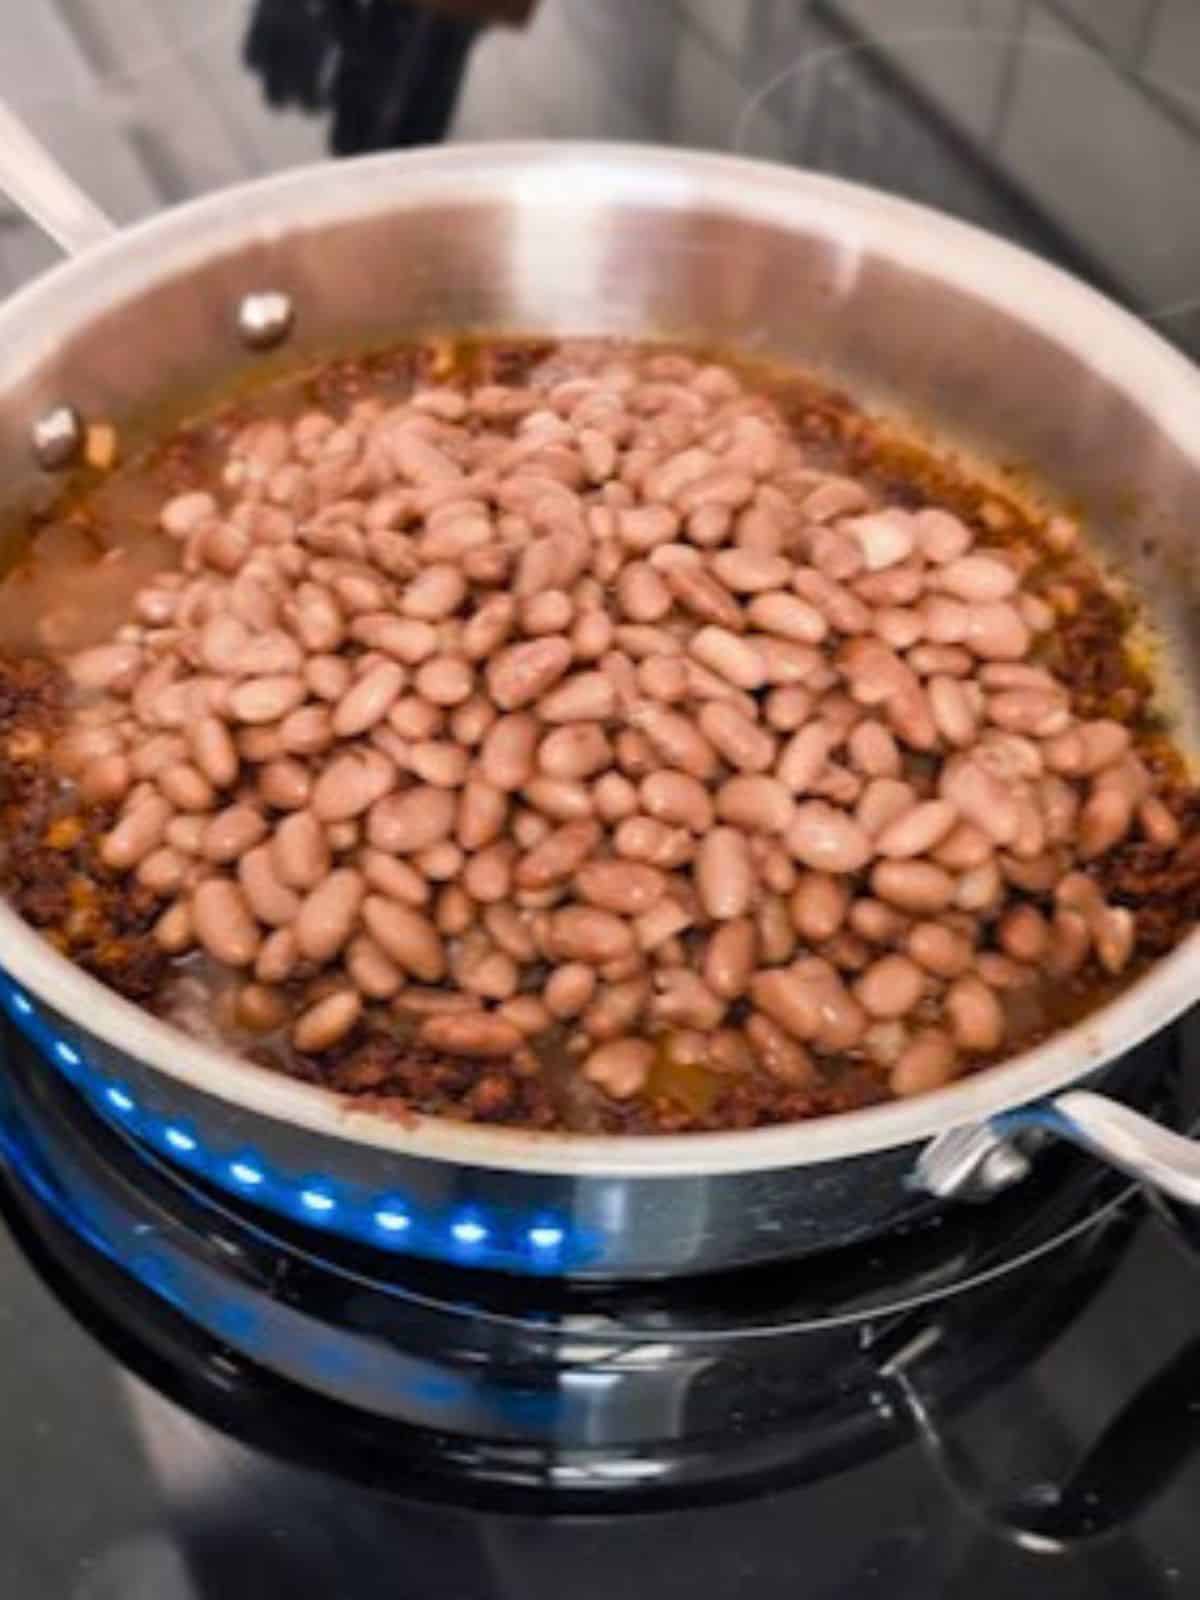 Chorizo and whole beans in a pan.